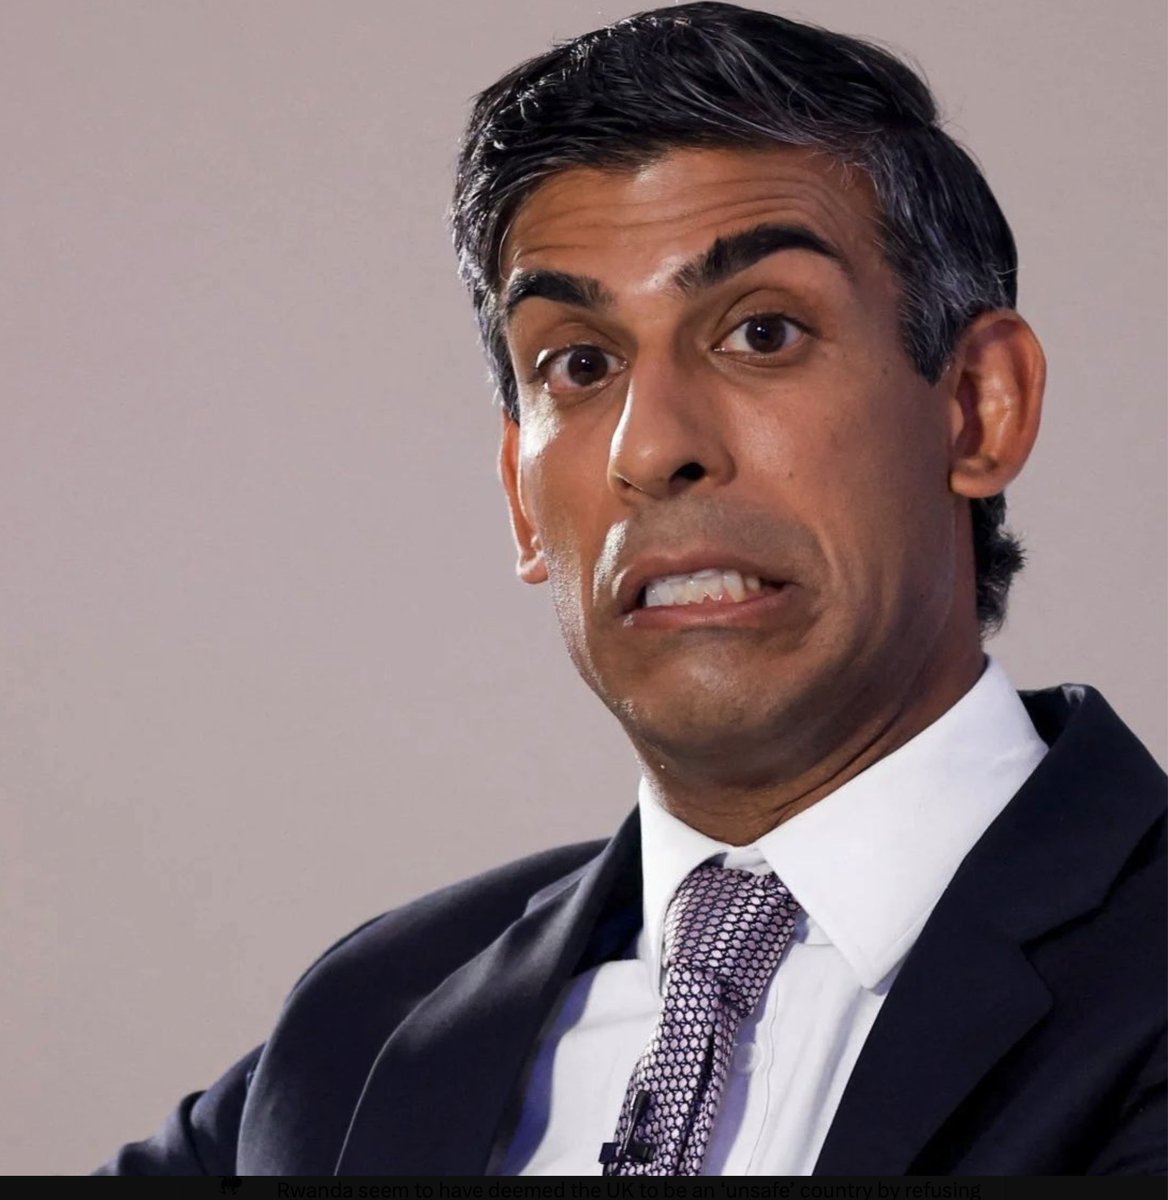 Rishi Sunak's *plan* is to squeeze all the money he can out of society, services and *us*! 
His plan *is* working and we don't acknowledge it...
#ToriesOut650  #SunakOut540  #GeneralElectionNow #Sunackered #ToryChaos #PMQs